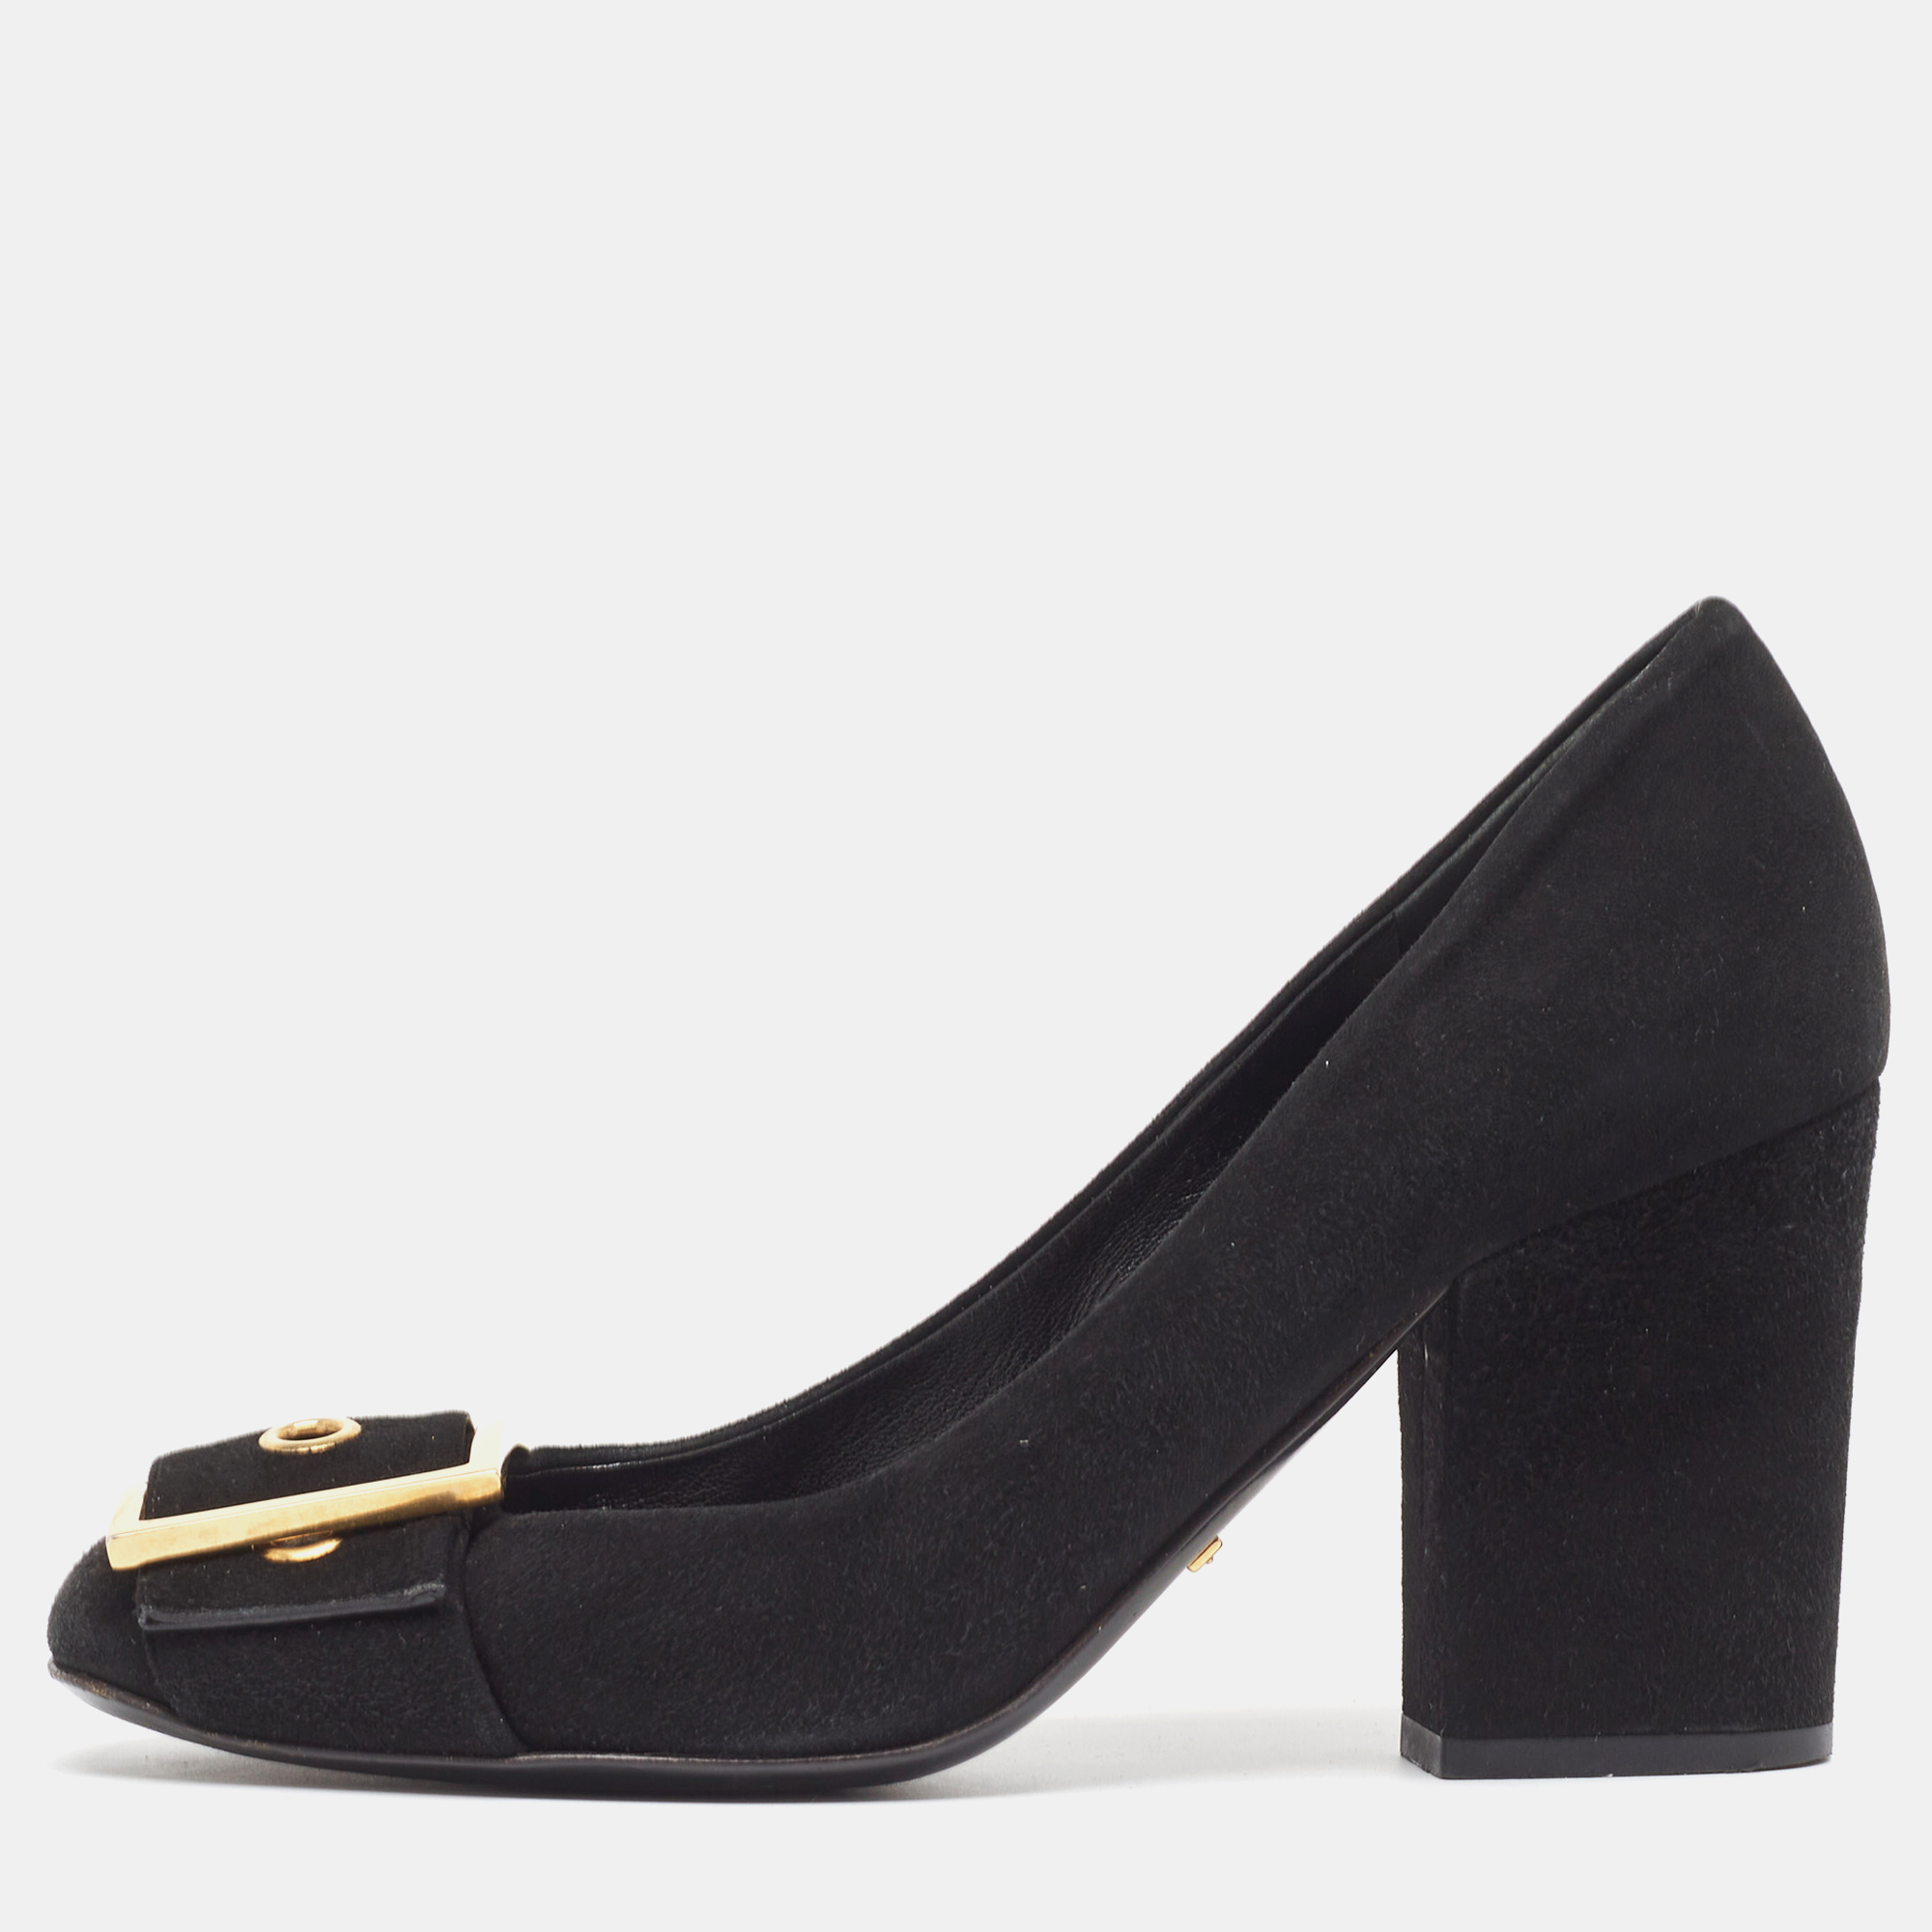 The fashion house's tradition of excellence coupled with modern design sensibilities works to make these Gucci black pumps a fabulous choice. Theyll help you deliver a chic look with ease.